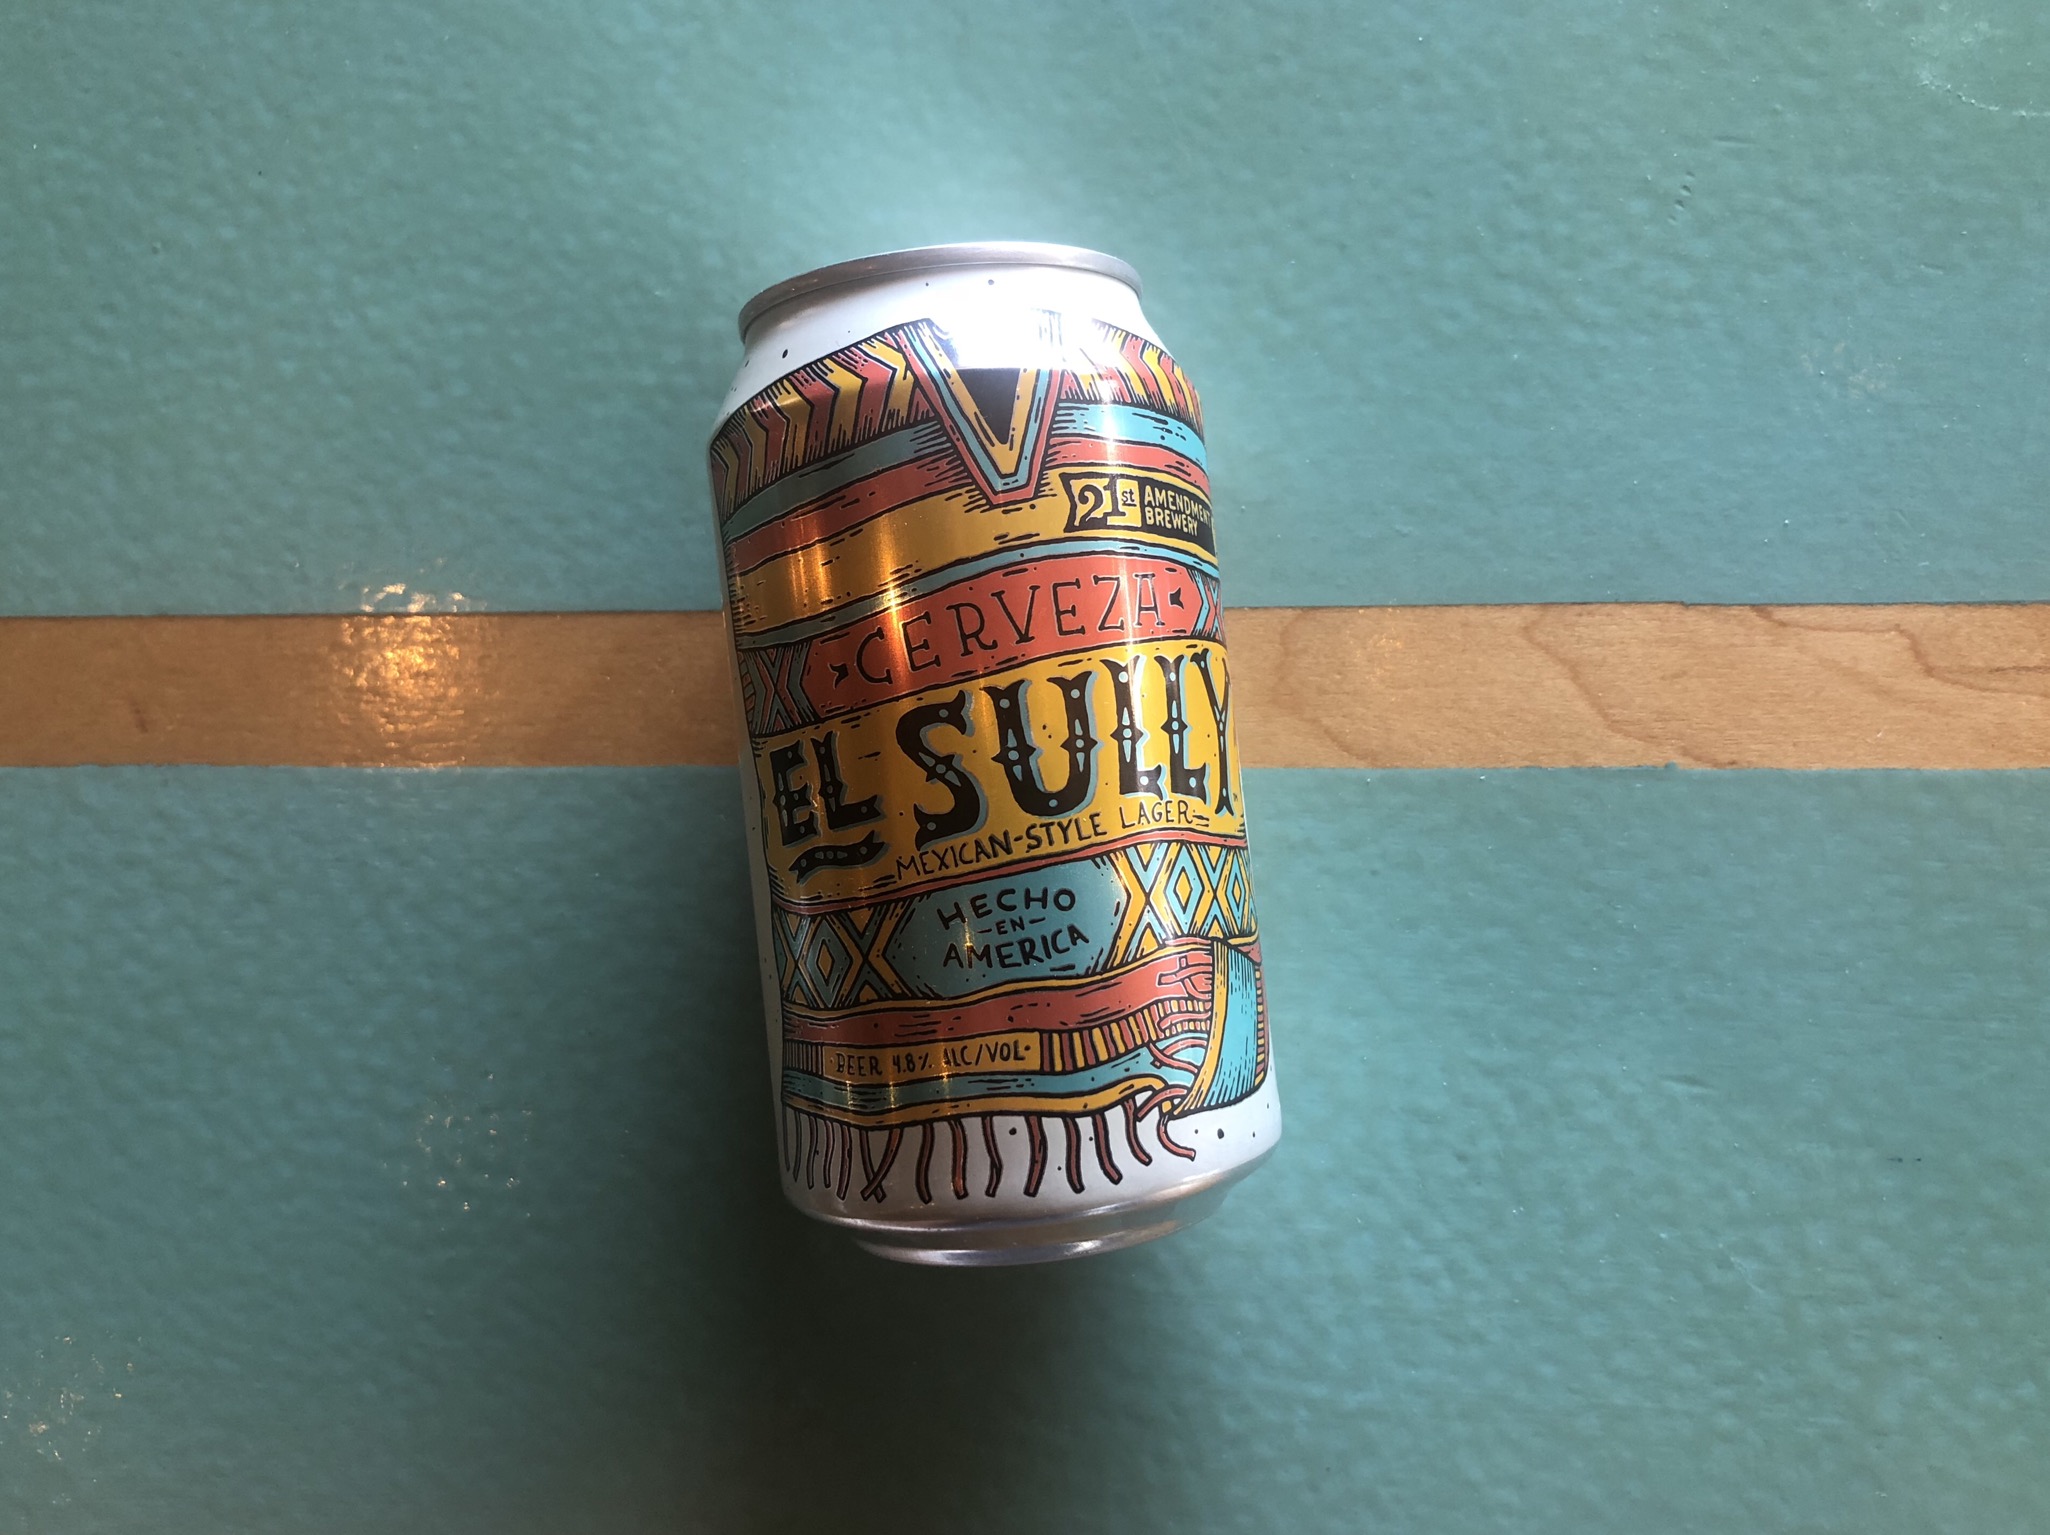 21st Amendment Brewery | El Sully Mexican-Style Lager